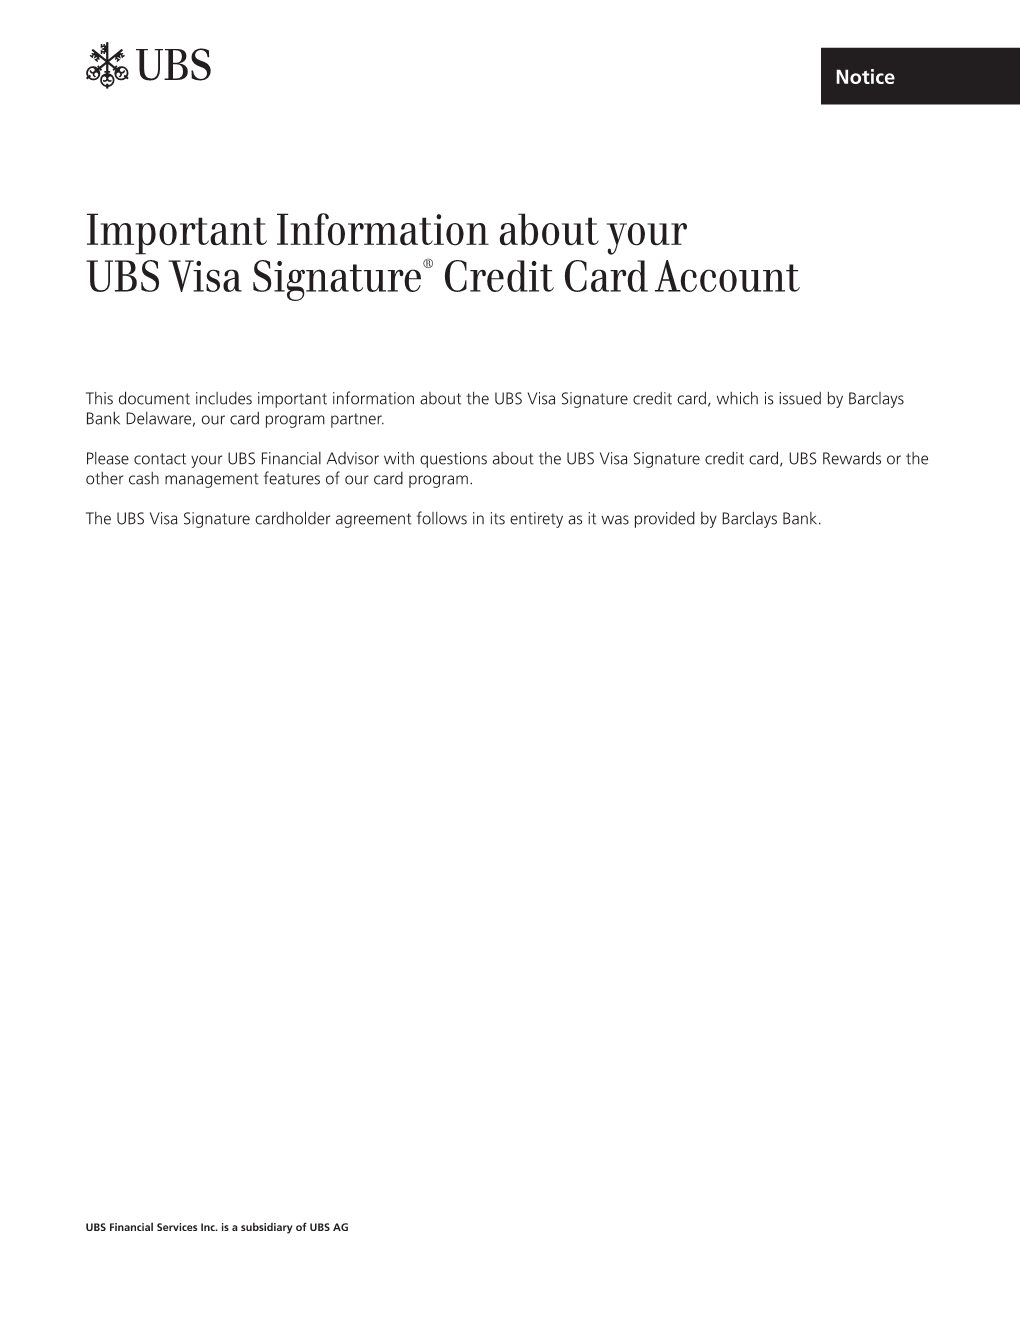 Important Information About Your UBS Visa Signature® Credit Card Account